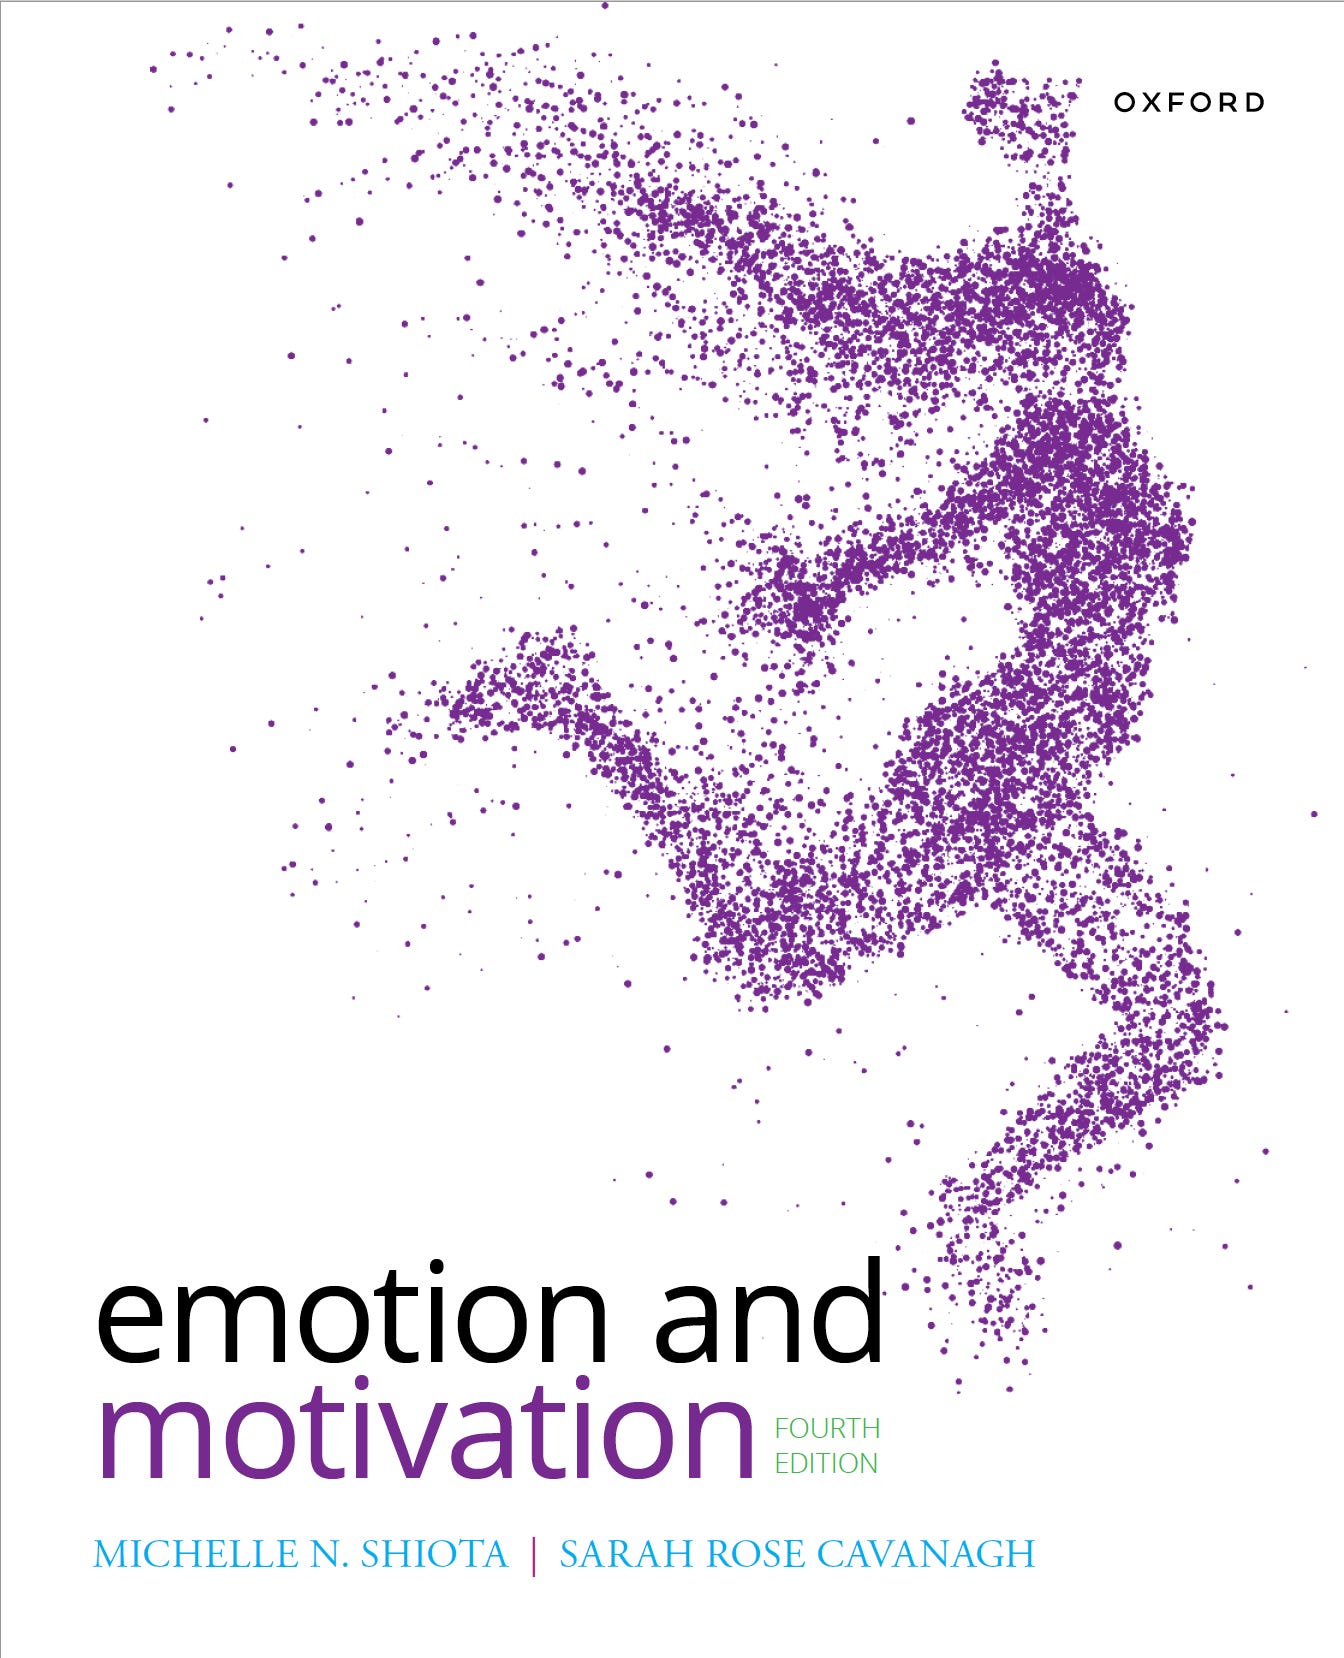 Person made of purple dots leaps in joy off a page - Textbook Emotion & Motivation, Shiota & Cavanagh, 4th edition